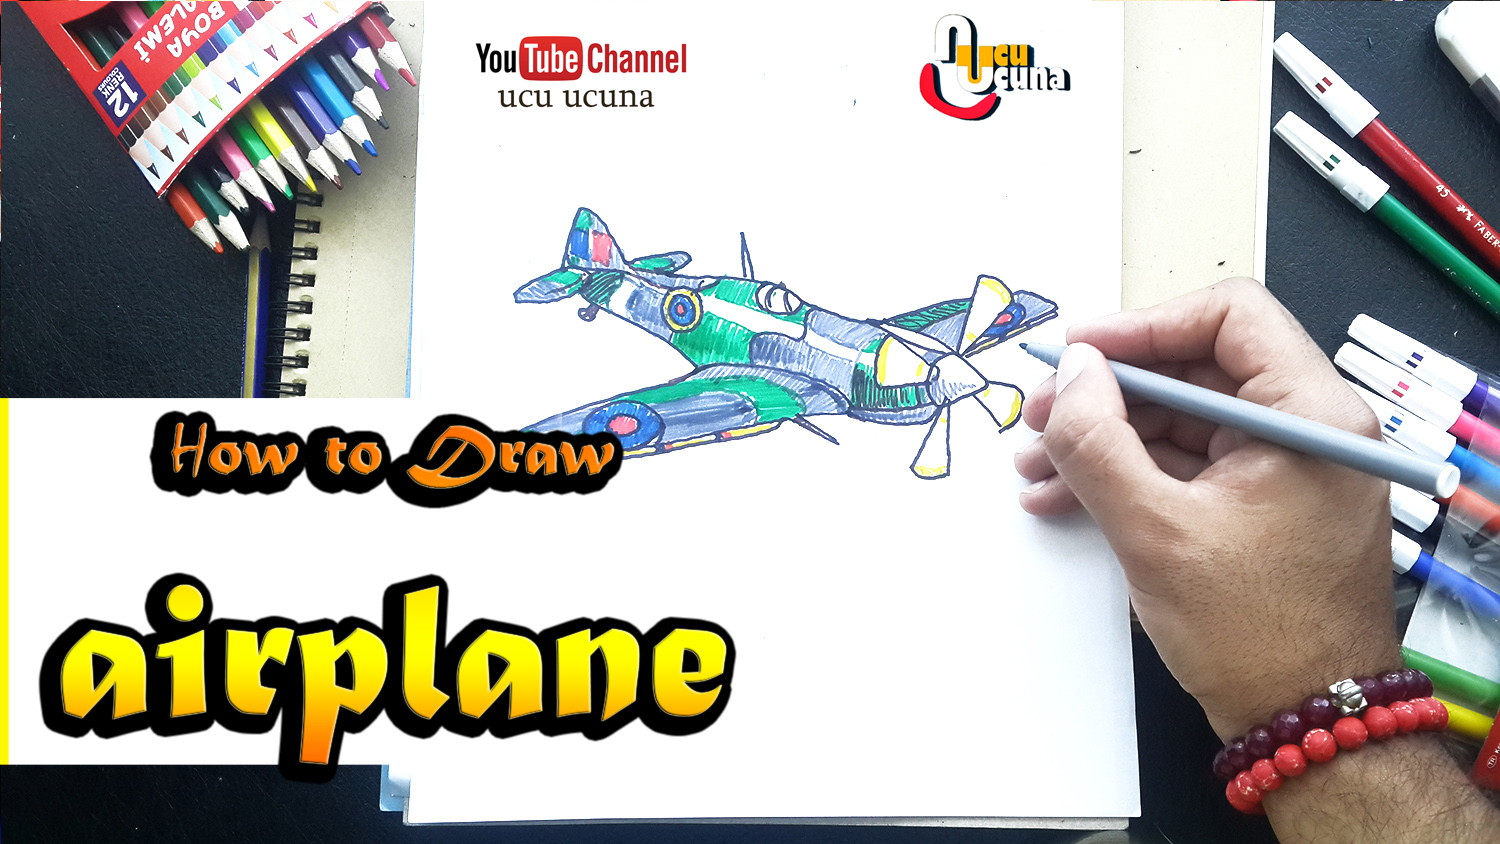 Hi everyone i ll be showing you how to draw airplane step by step Let s learn draw for  kids  art  important at my life  drow  with me i hope you like funny videos  tutorial if you like my draw you click my youtube channel ucu ucuna